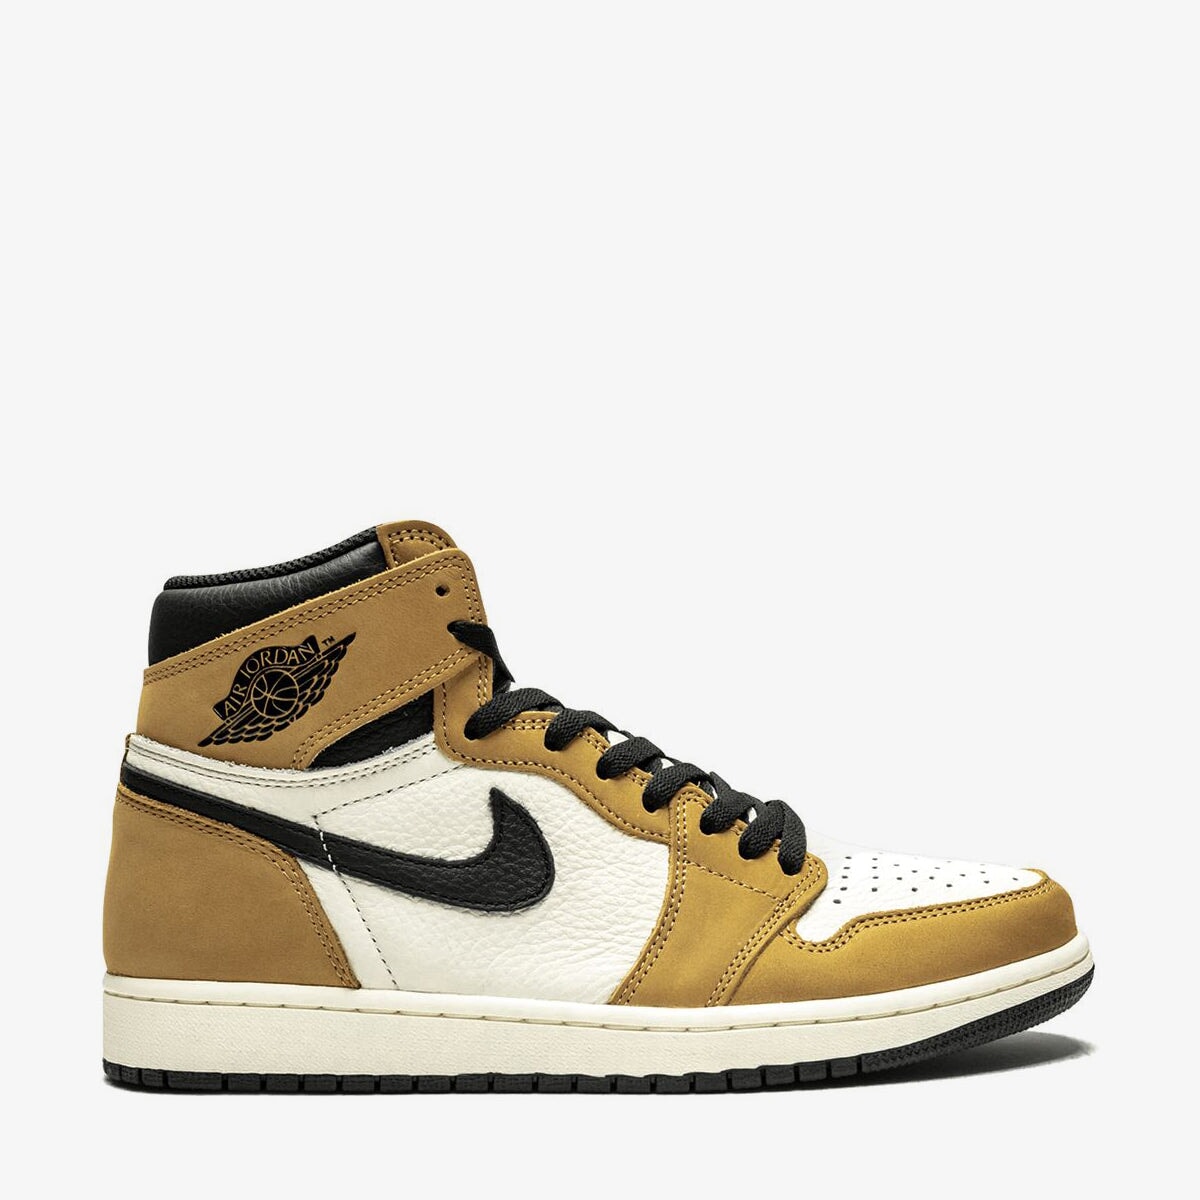 Air Jordan 1 Retro High OG 'Rookie of the Year' (ROTY) – Plug and Play